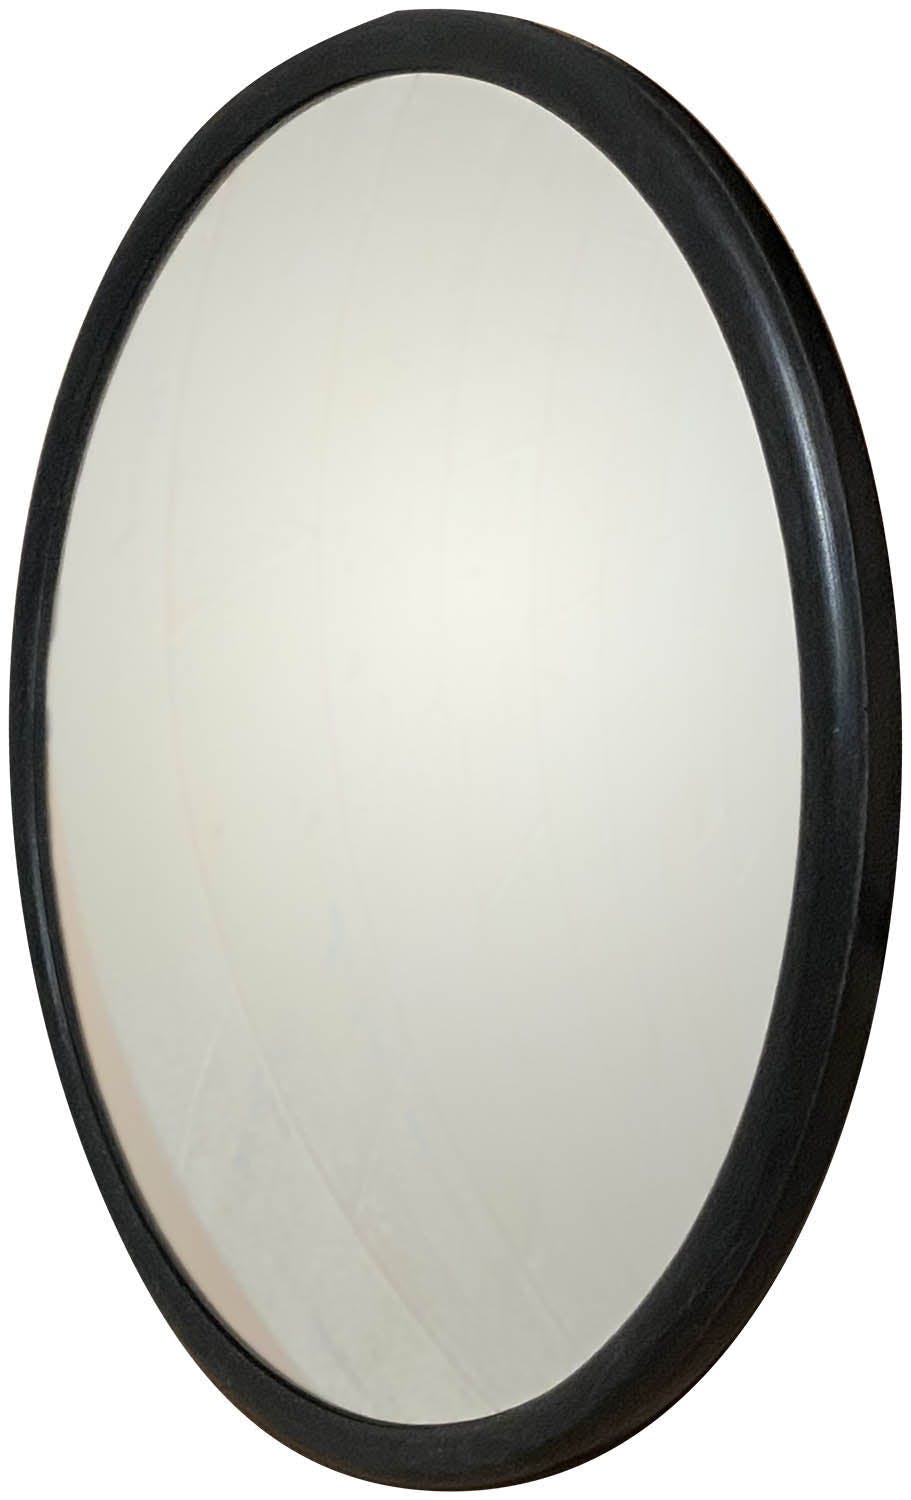 Mirror, Convex, Round, Bright Stainless, 8", display box (Pack of 6) - 608-front_952ea55b-db80-43e3-a04d-4ed0237f9b69